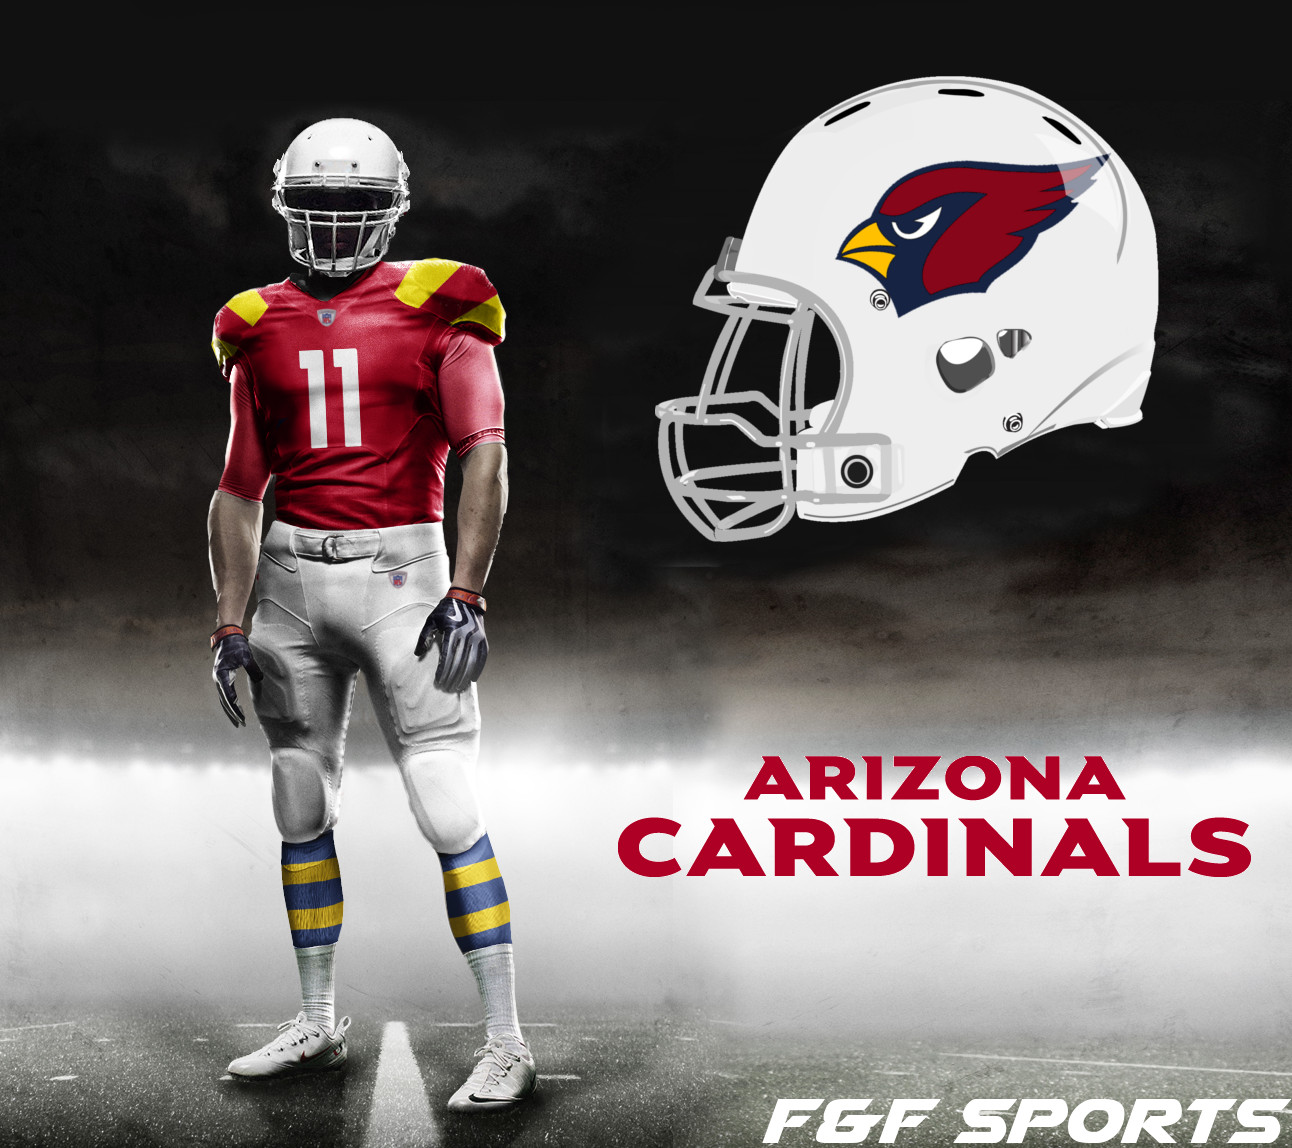 NFL: These Arizona Cardinals Concept Uniforms are Better than the Real Ones  